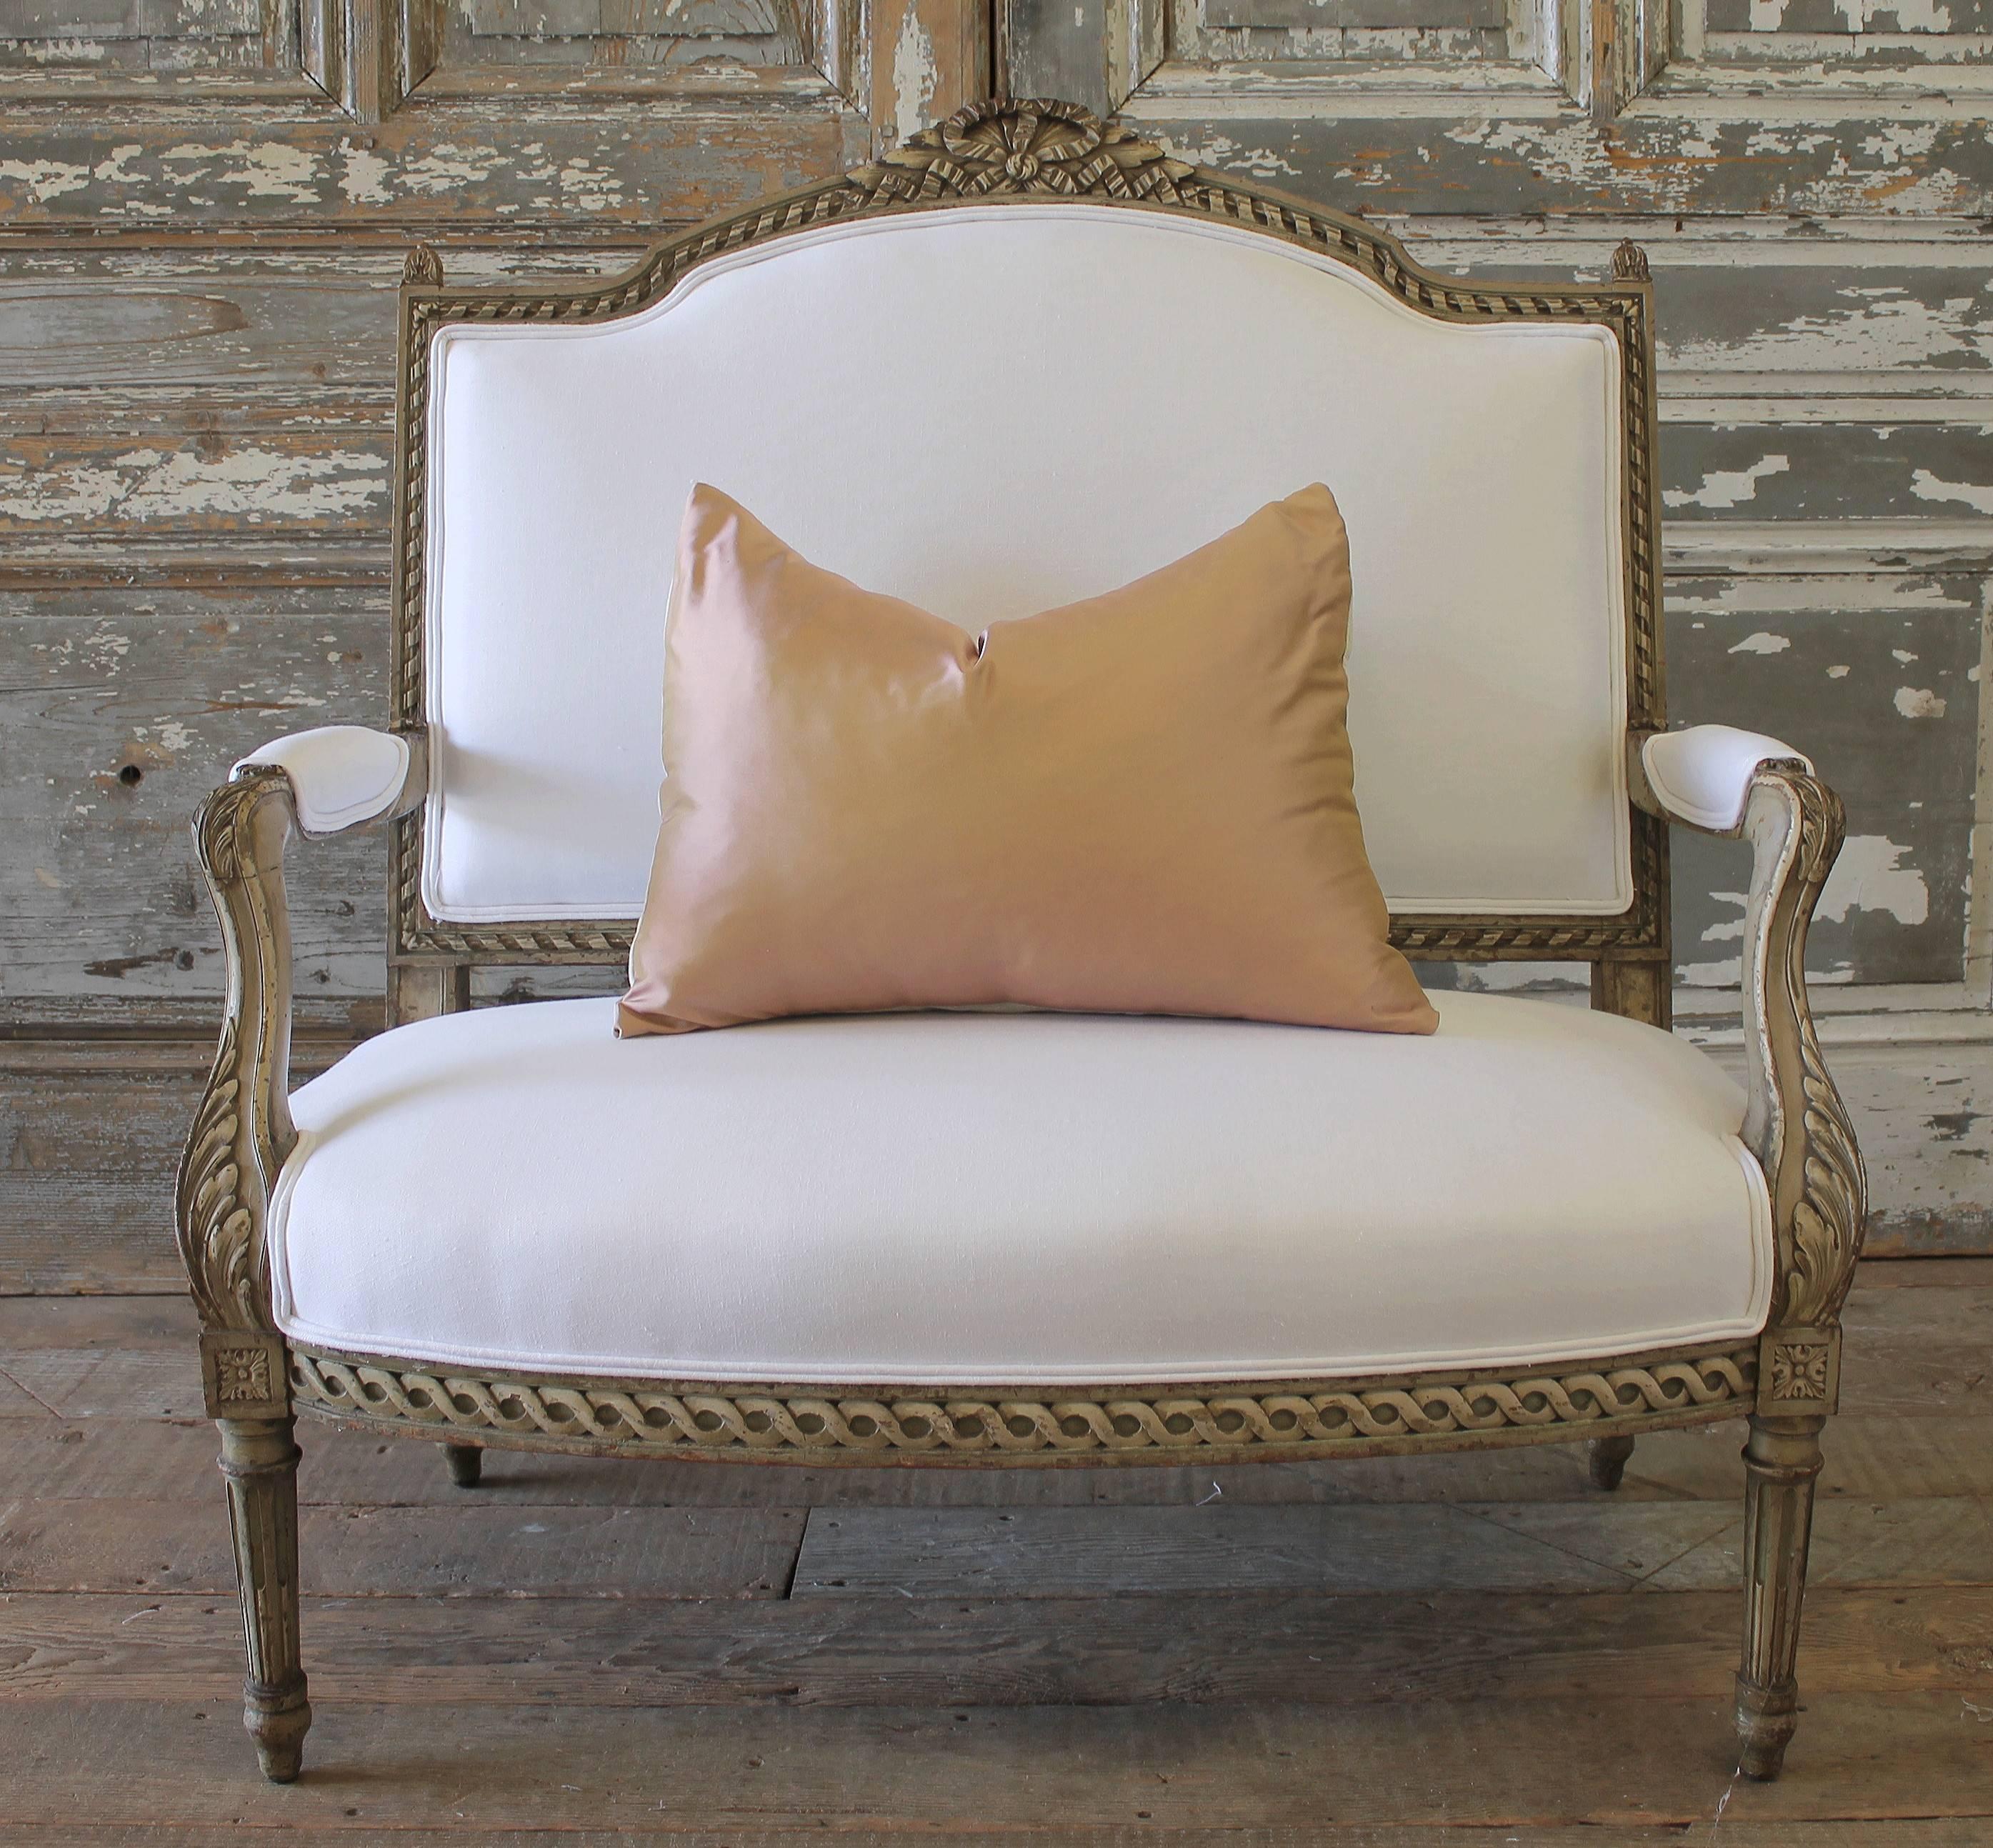 Beautiful French Country Louis XVI settee with original paint finish. The color of the frame is a soft greyish-taupe with darkened accent glaze rubbed into the carvings. The carvings are done very well, with a large ribbon and curled ribbon along